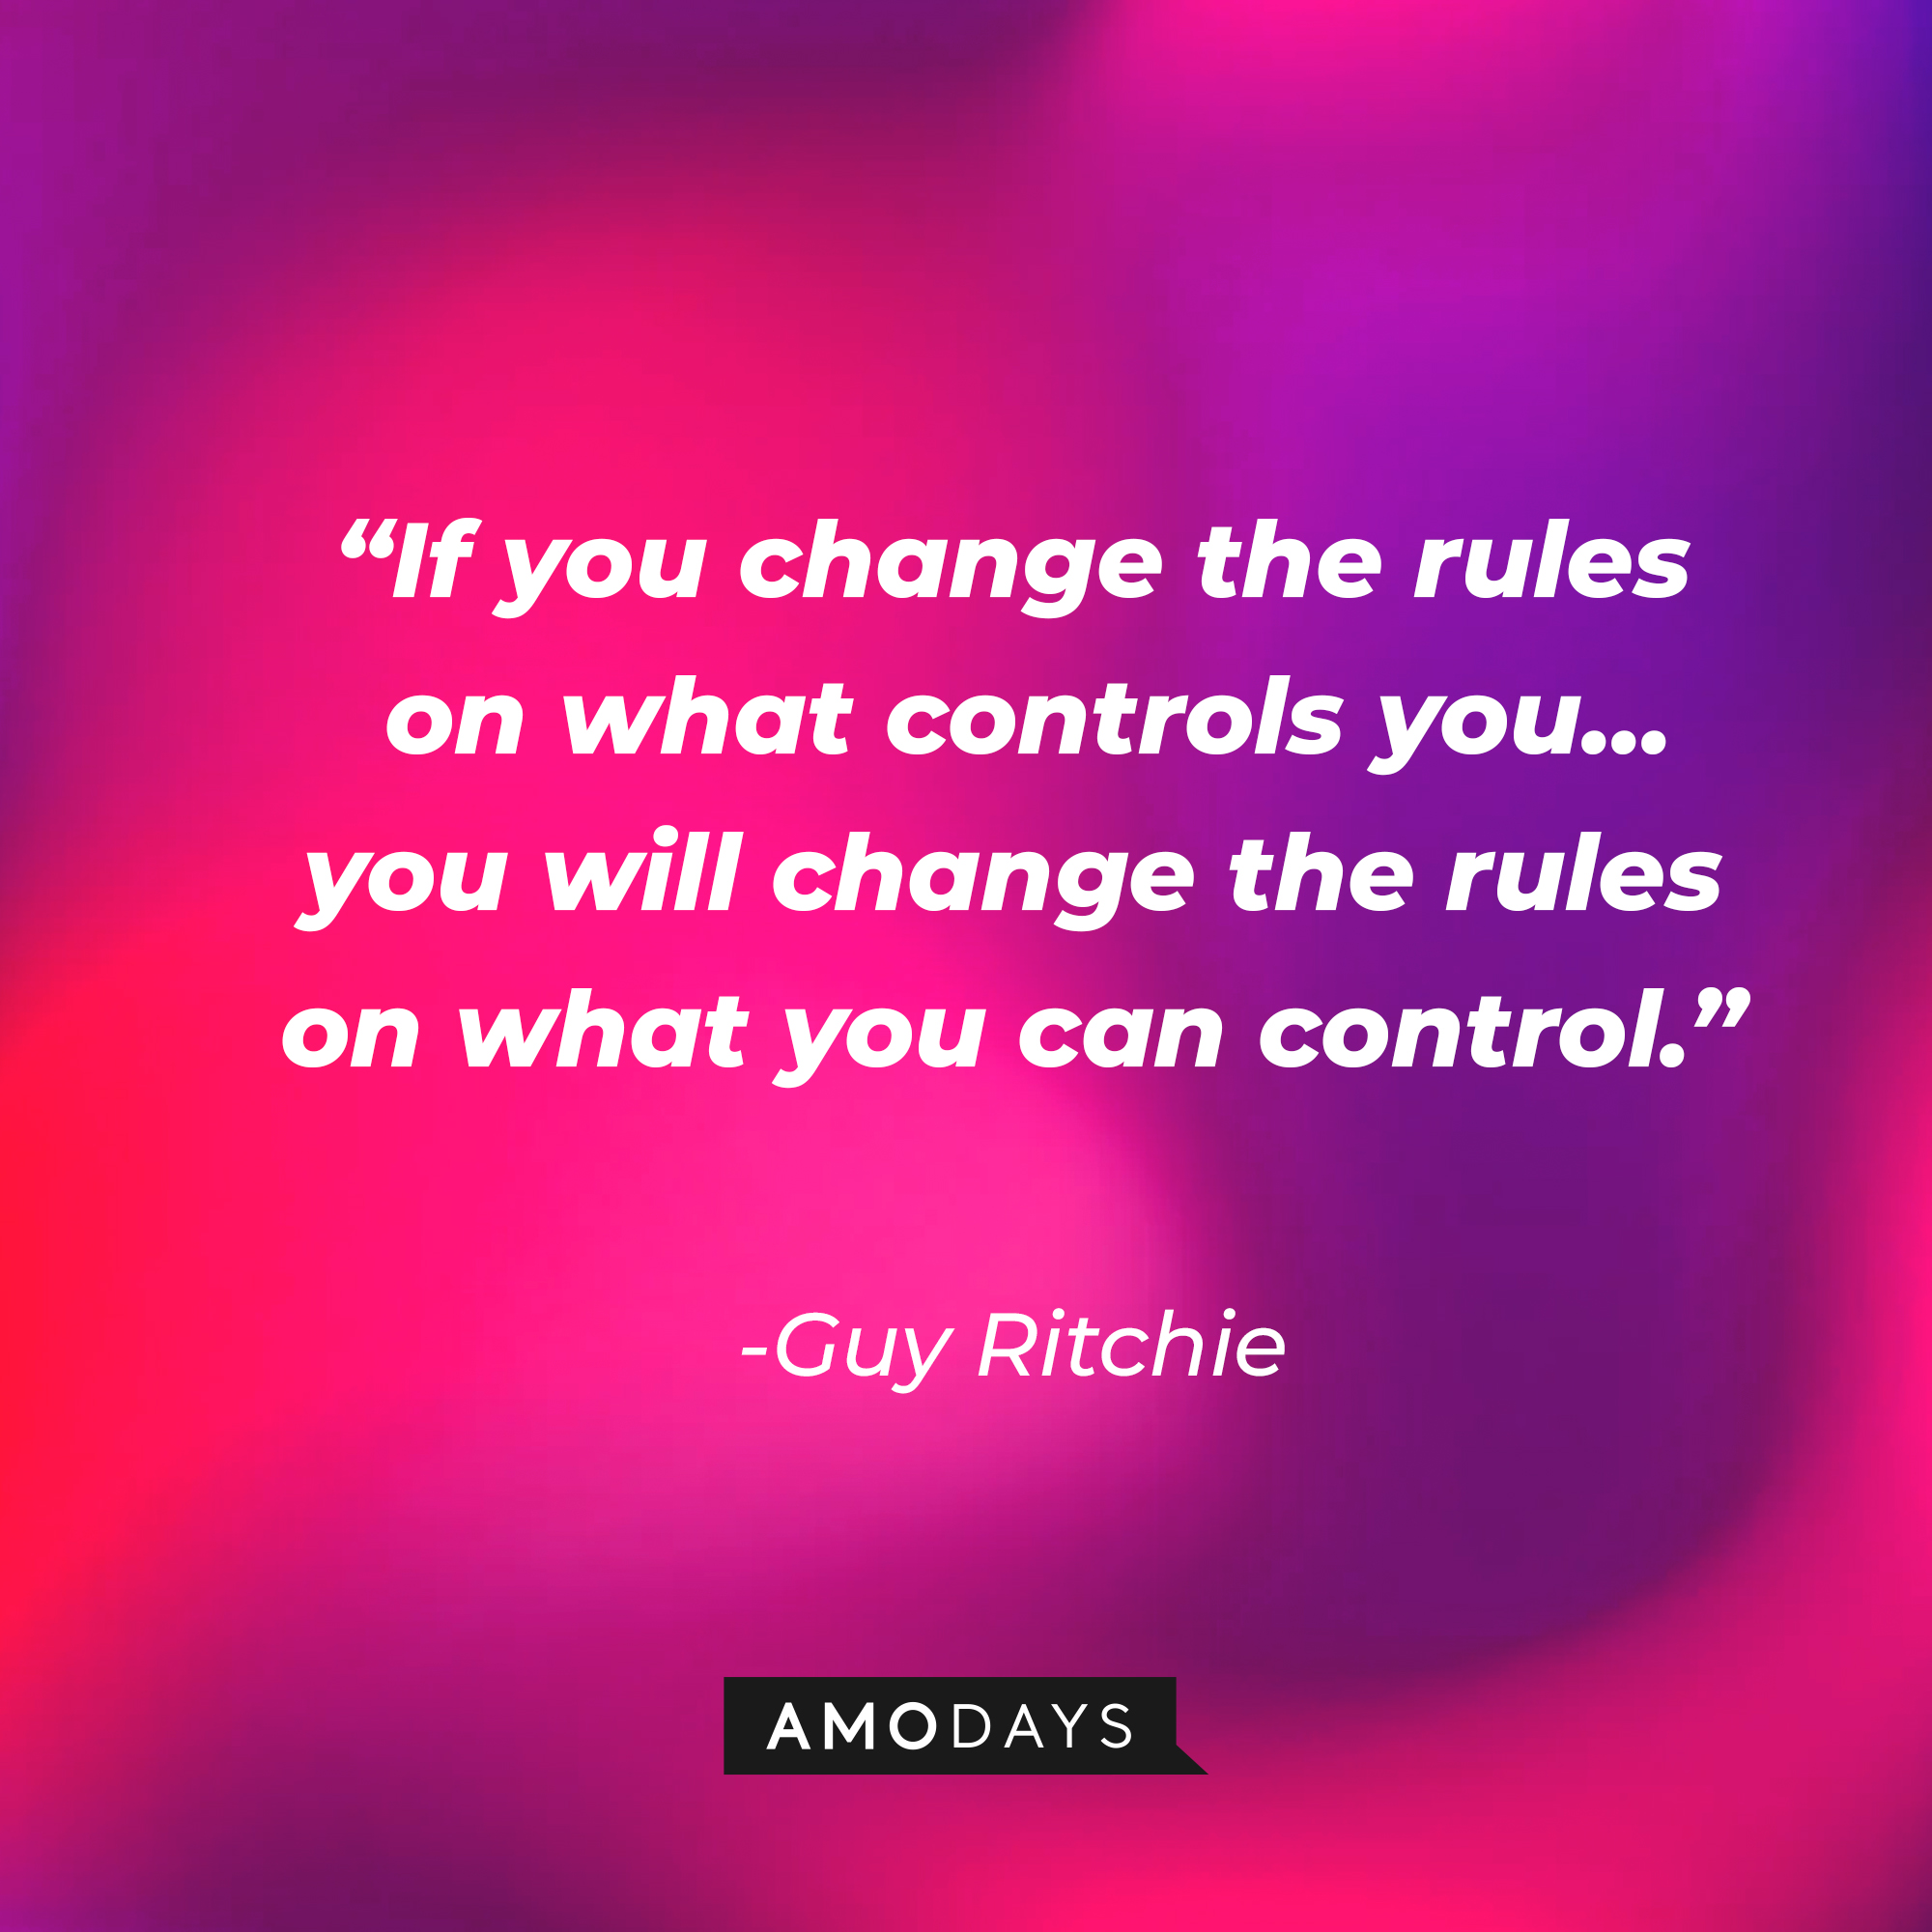 Guy Ritchie's quote, “If you change the rules on what controls you... you will change the rules on what you can control.” | Source: AmoDays